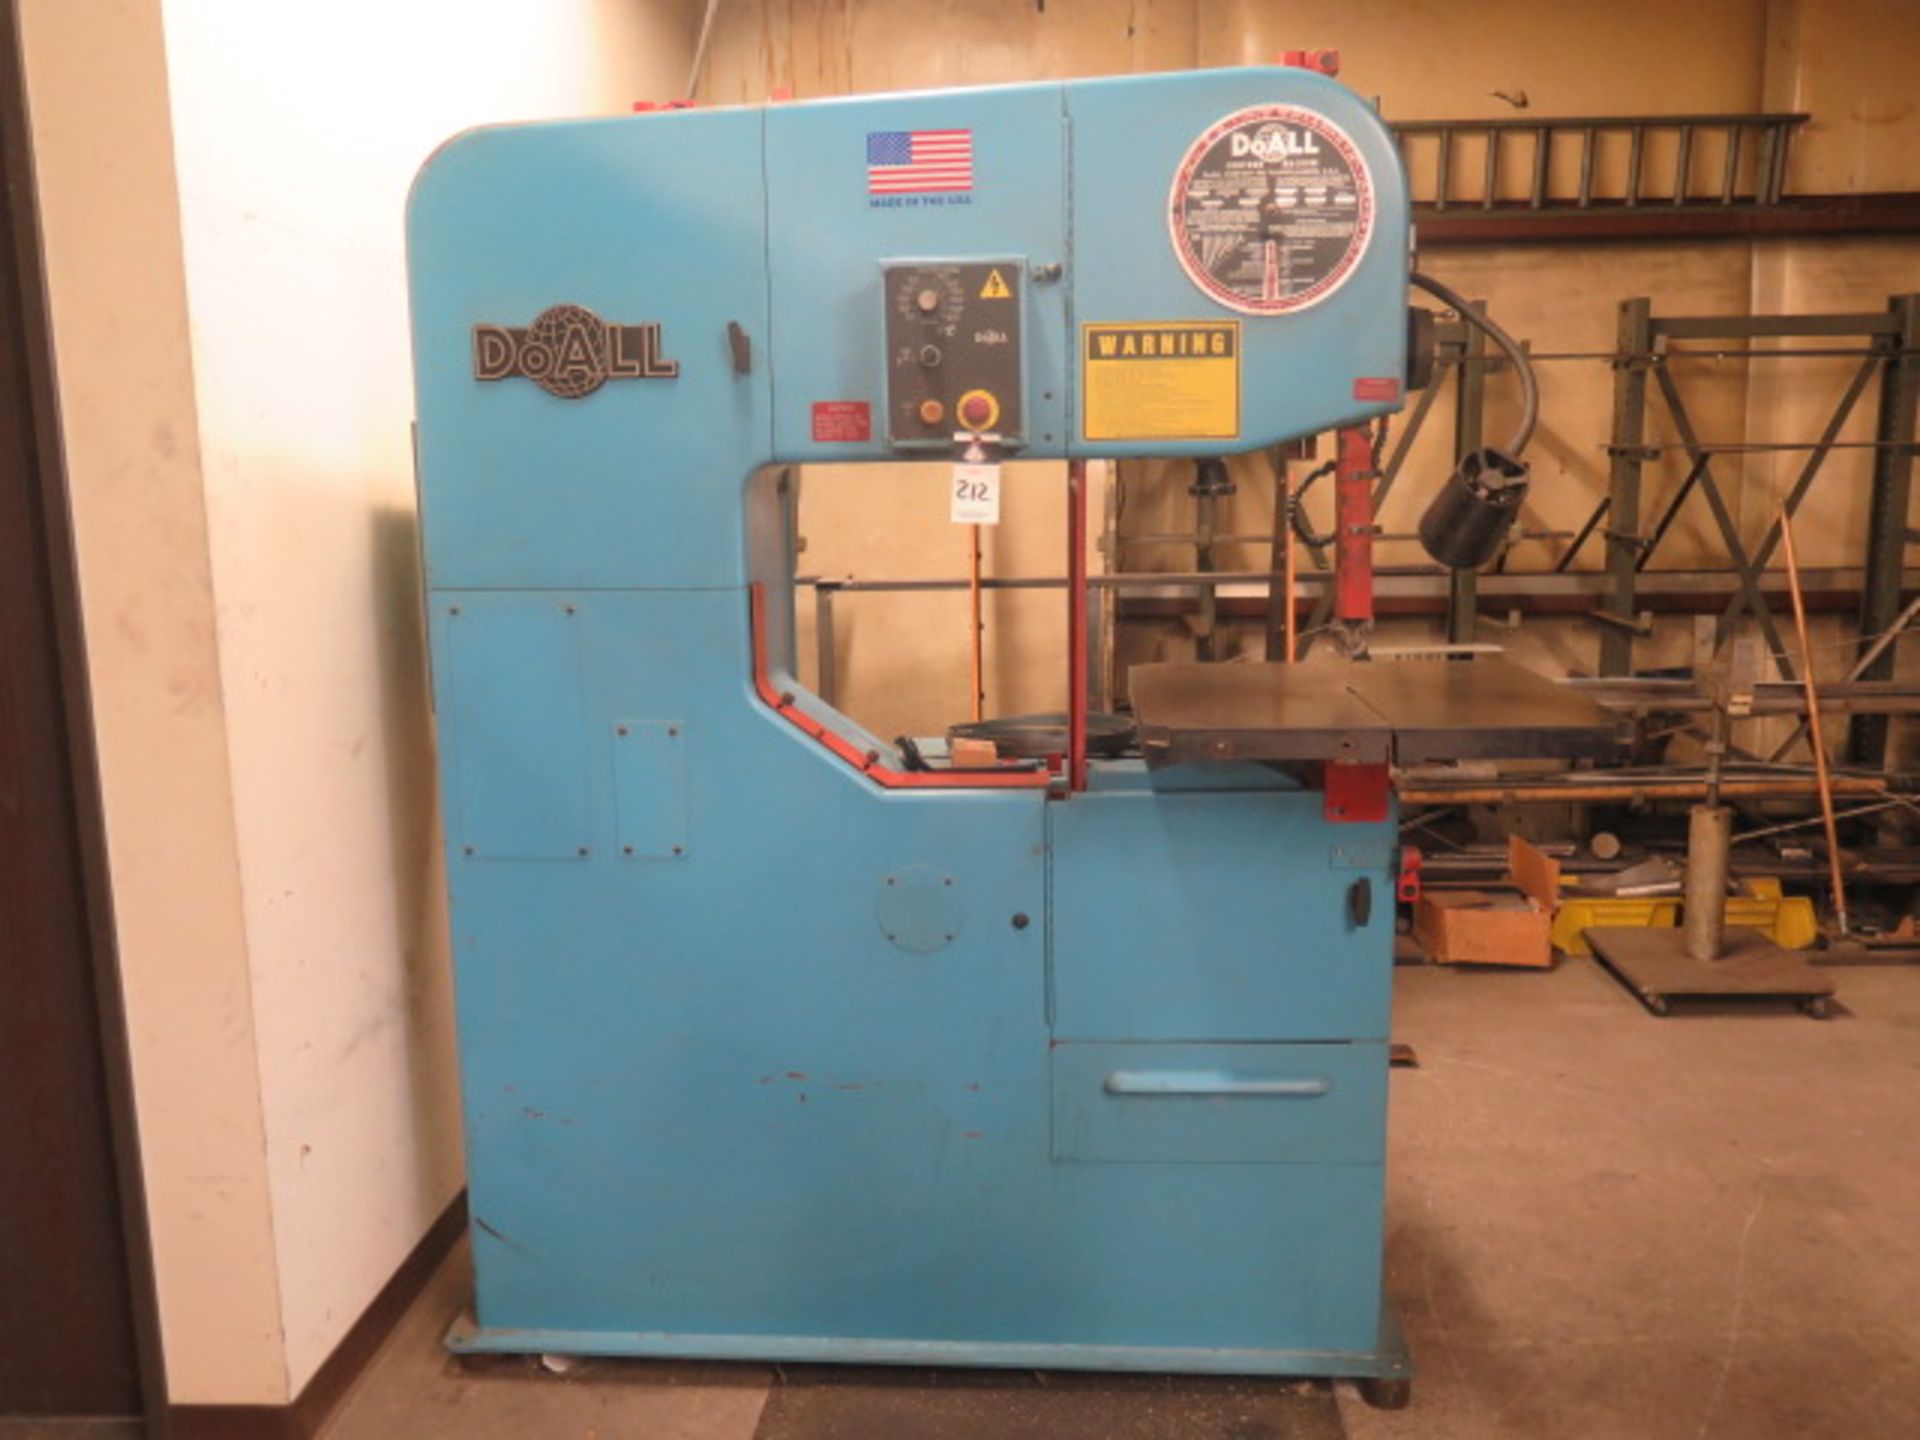 DoAll 3613-V3 36”/16” Vertical Band Saw s/n 538-98119 w/ 30-5500 Dial FPM, 26” x 26” Table - Image 2 of 9